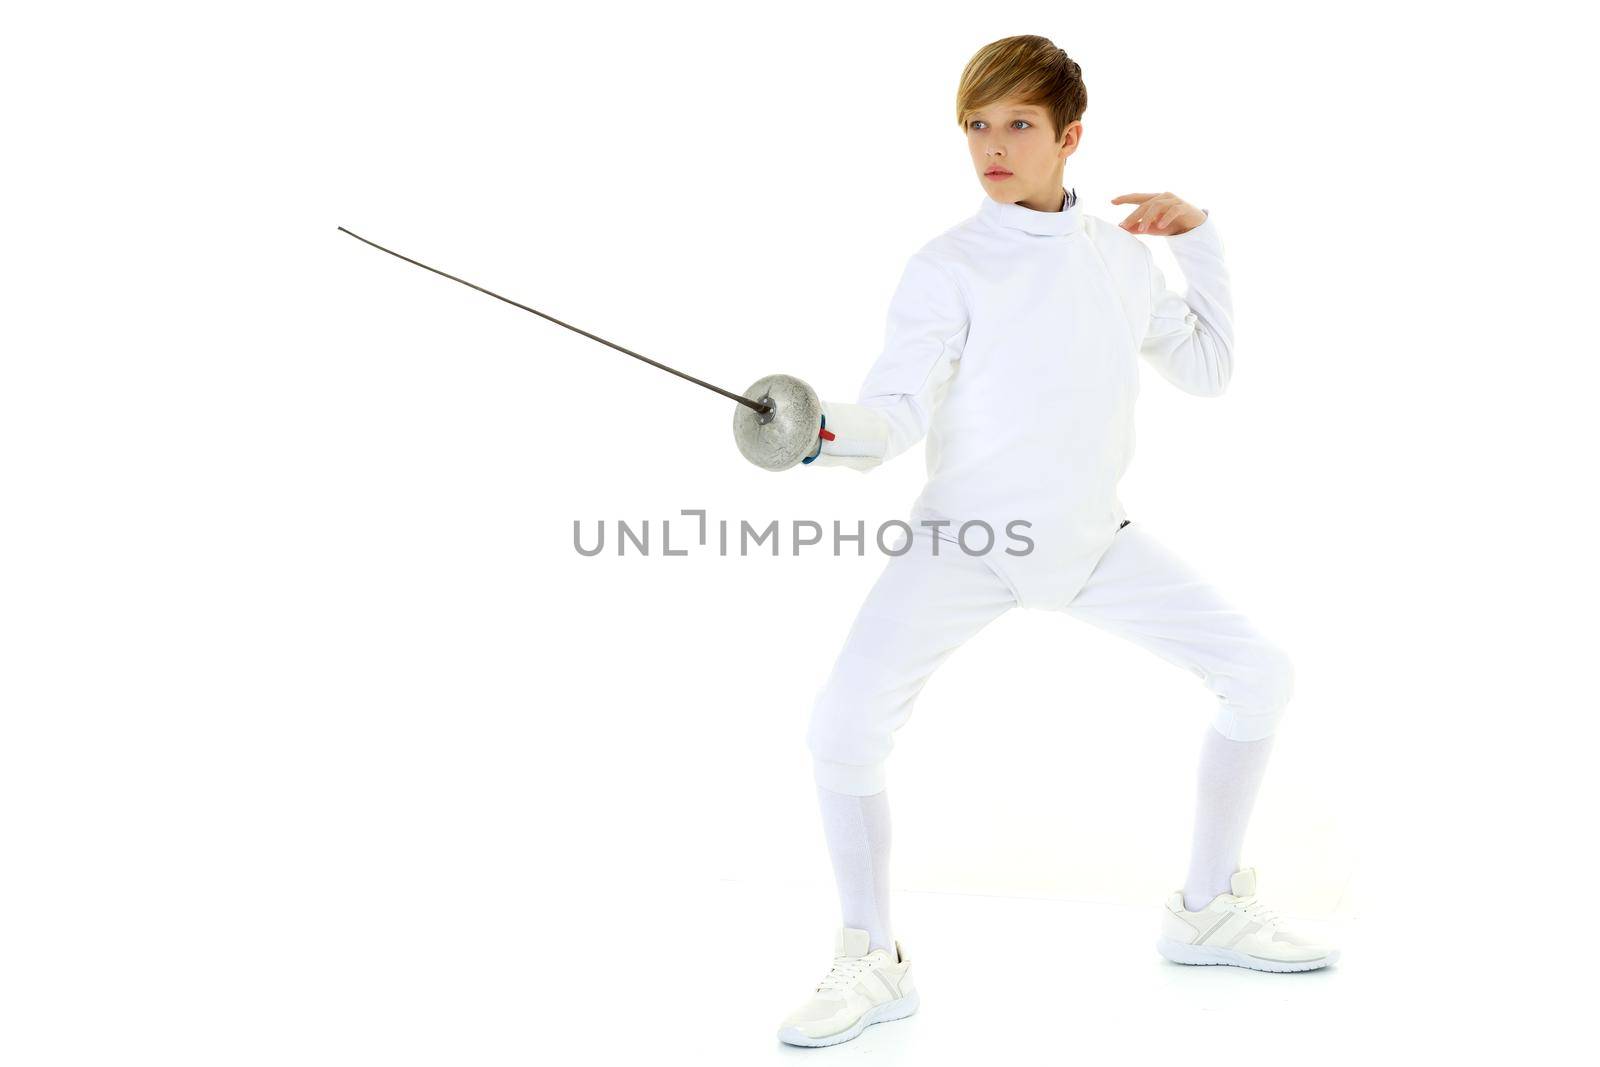 Fencer boy practicing effective technique. Portrait of handsome teenage boy fencing player wearing white uniform fighting with foil against white background.